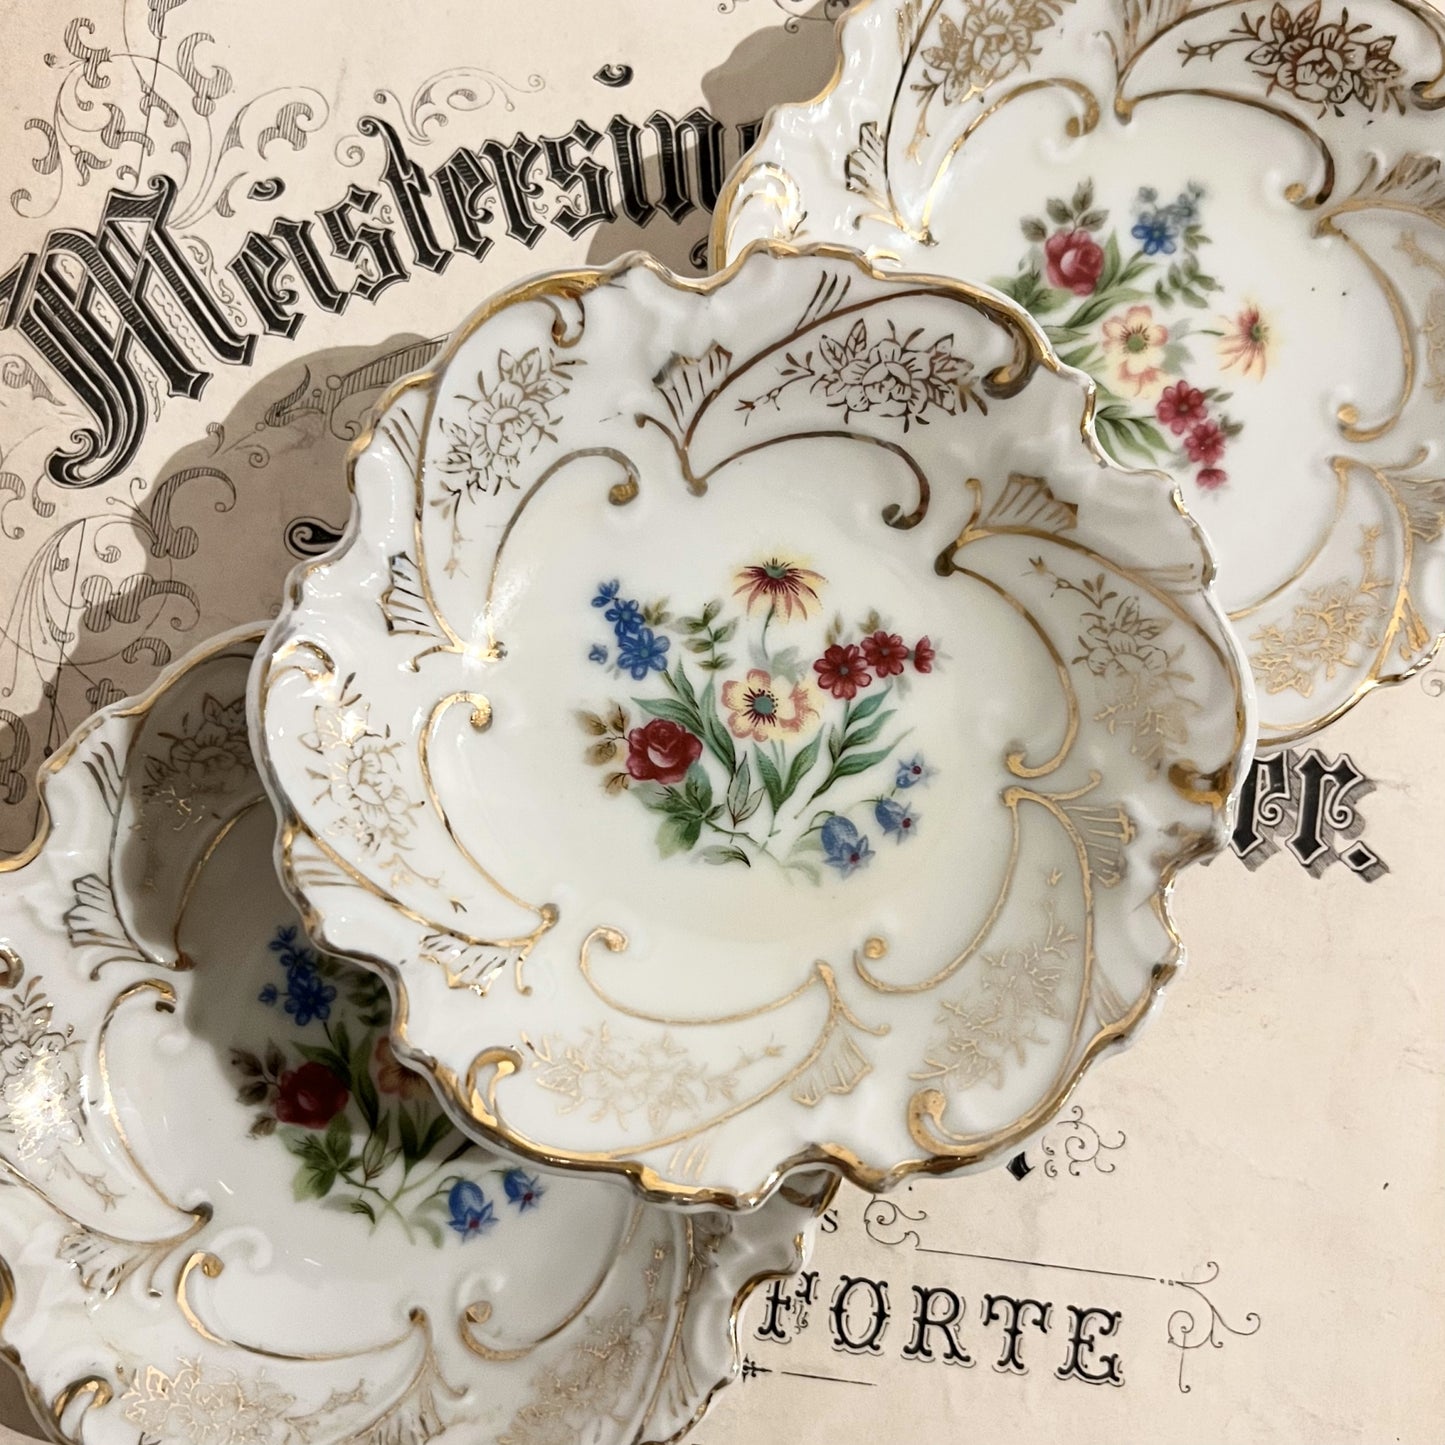 【Vintage】Germany ‐ 1940s Small Flower Plate